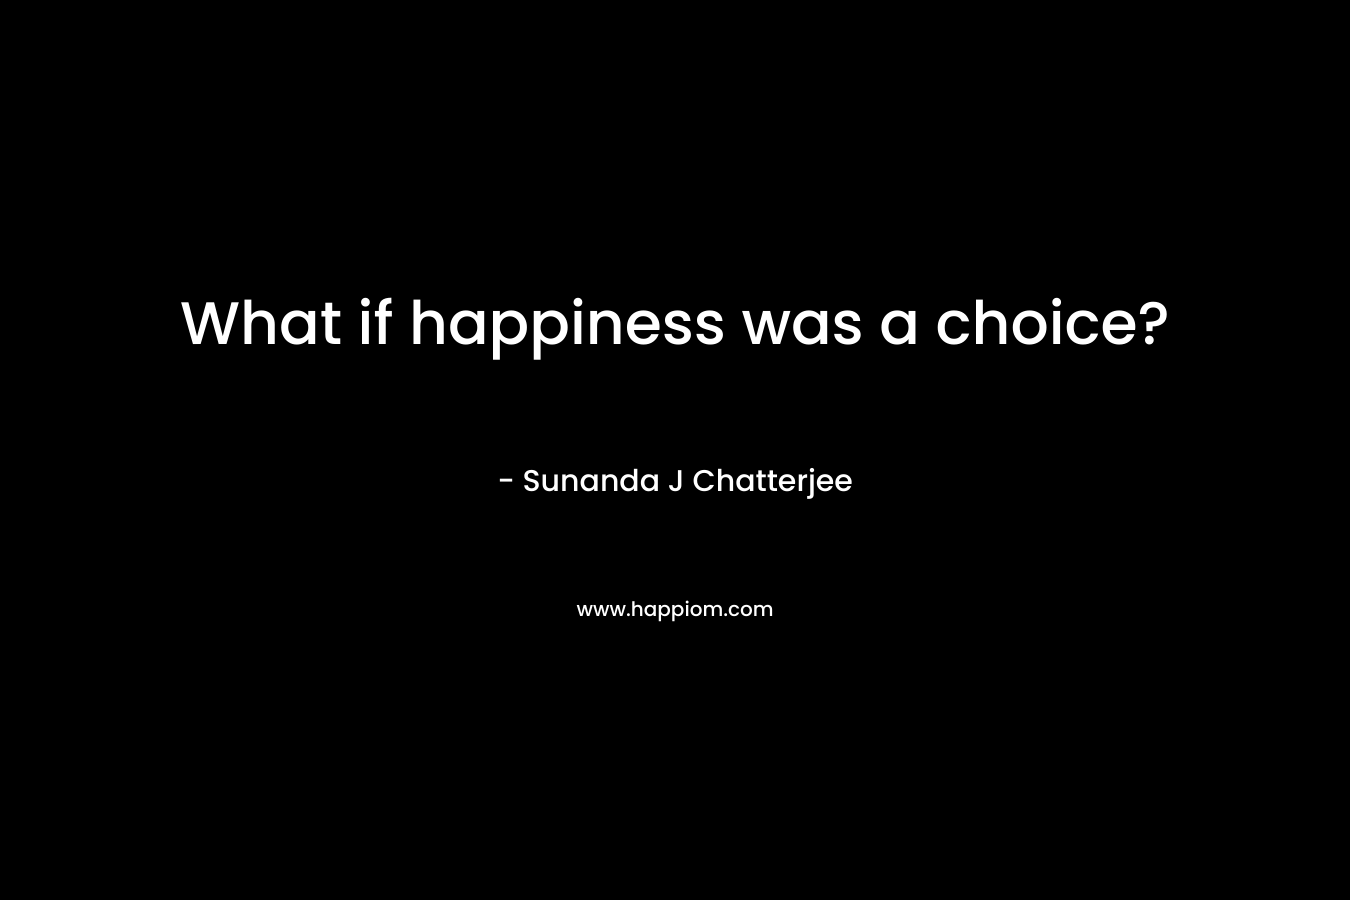 What if happiness was a choice? – Sunanda J Chatterjee